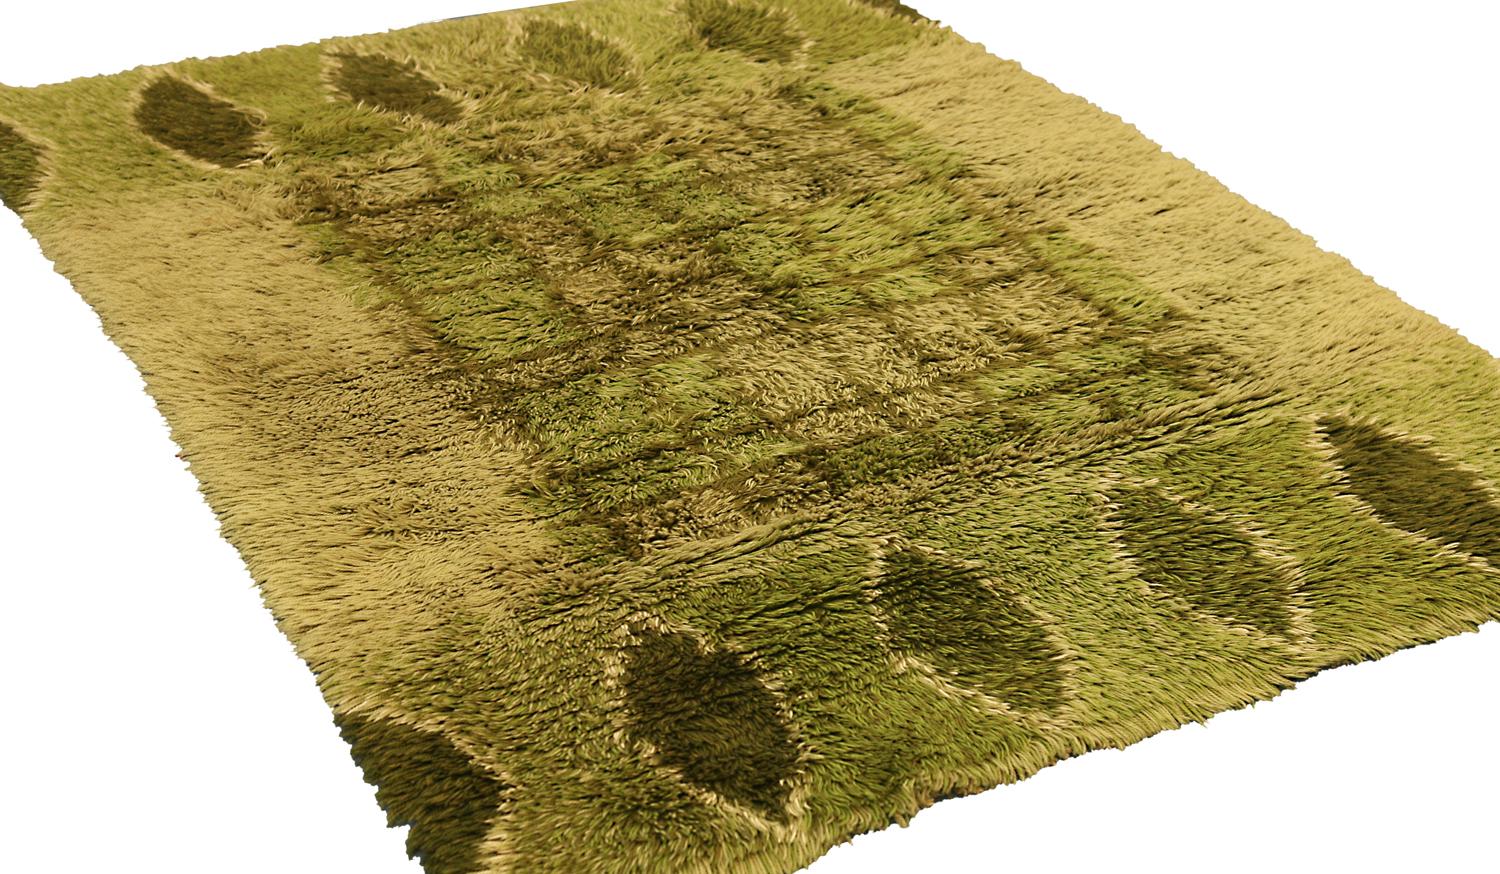 This is a beautiful, hand-knotted rya rug with an abstract design in olive green. This piece is woven around 1920-1950 with turkish knots, which create a thick and durable pile. Rya rugs are perfect for high-traffic areas because they are so durable